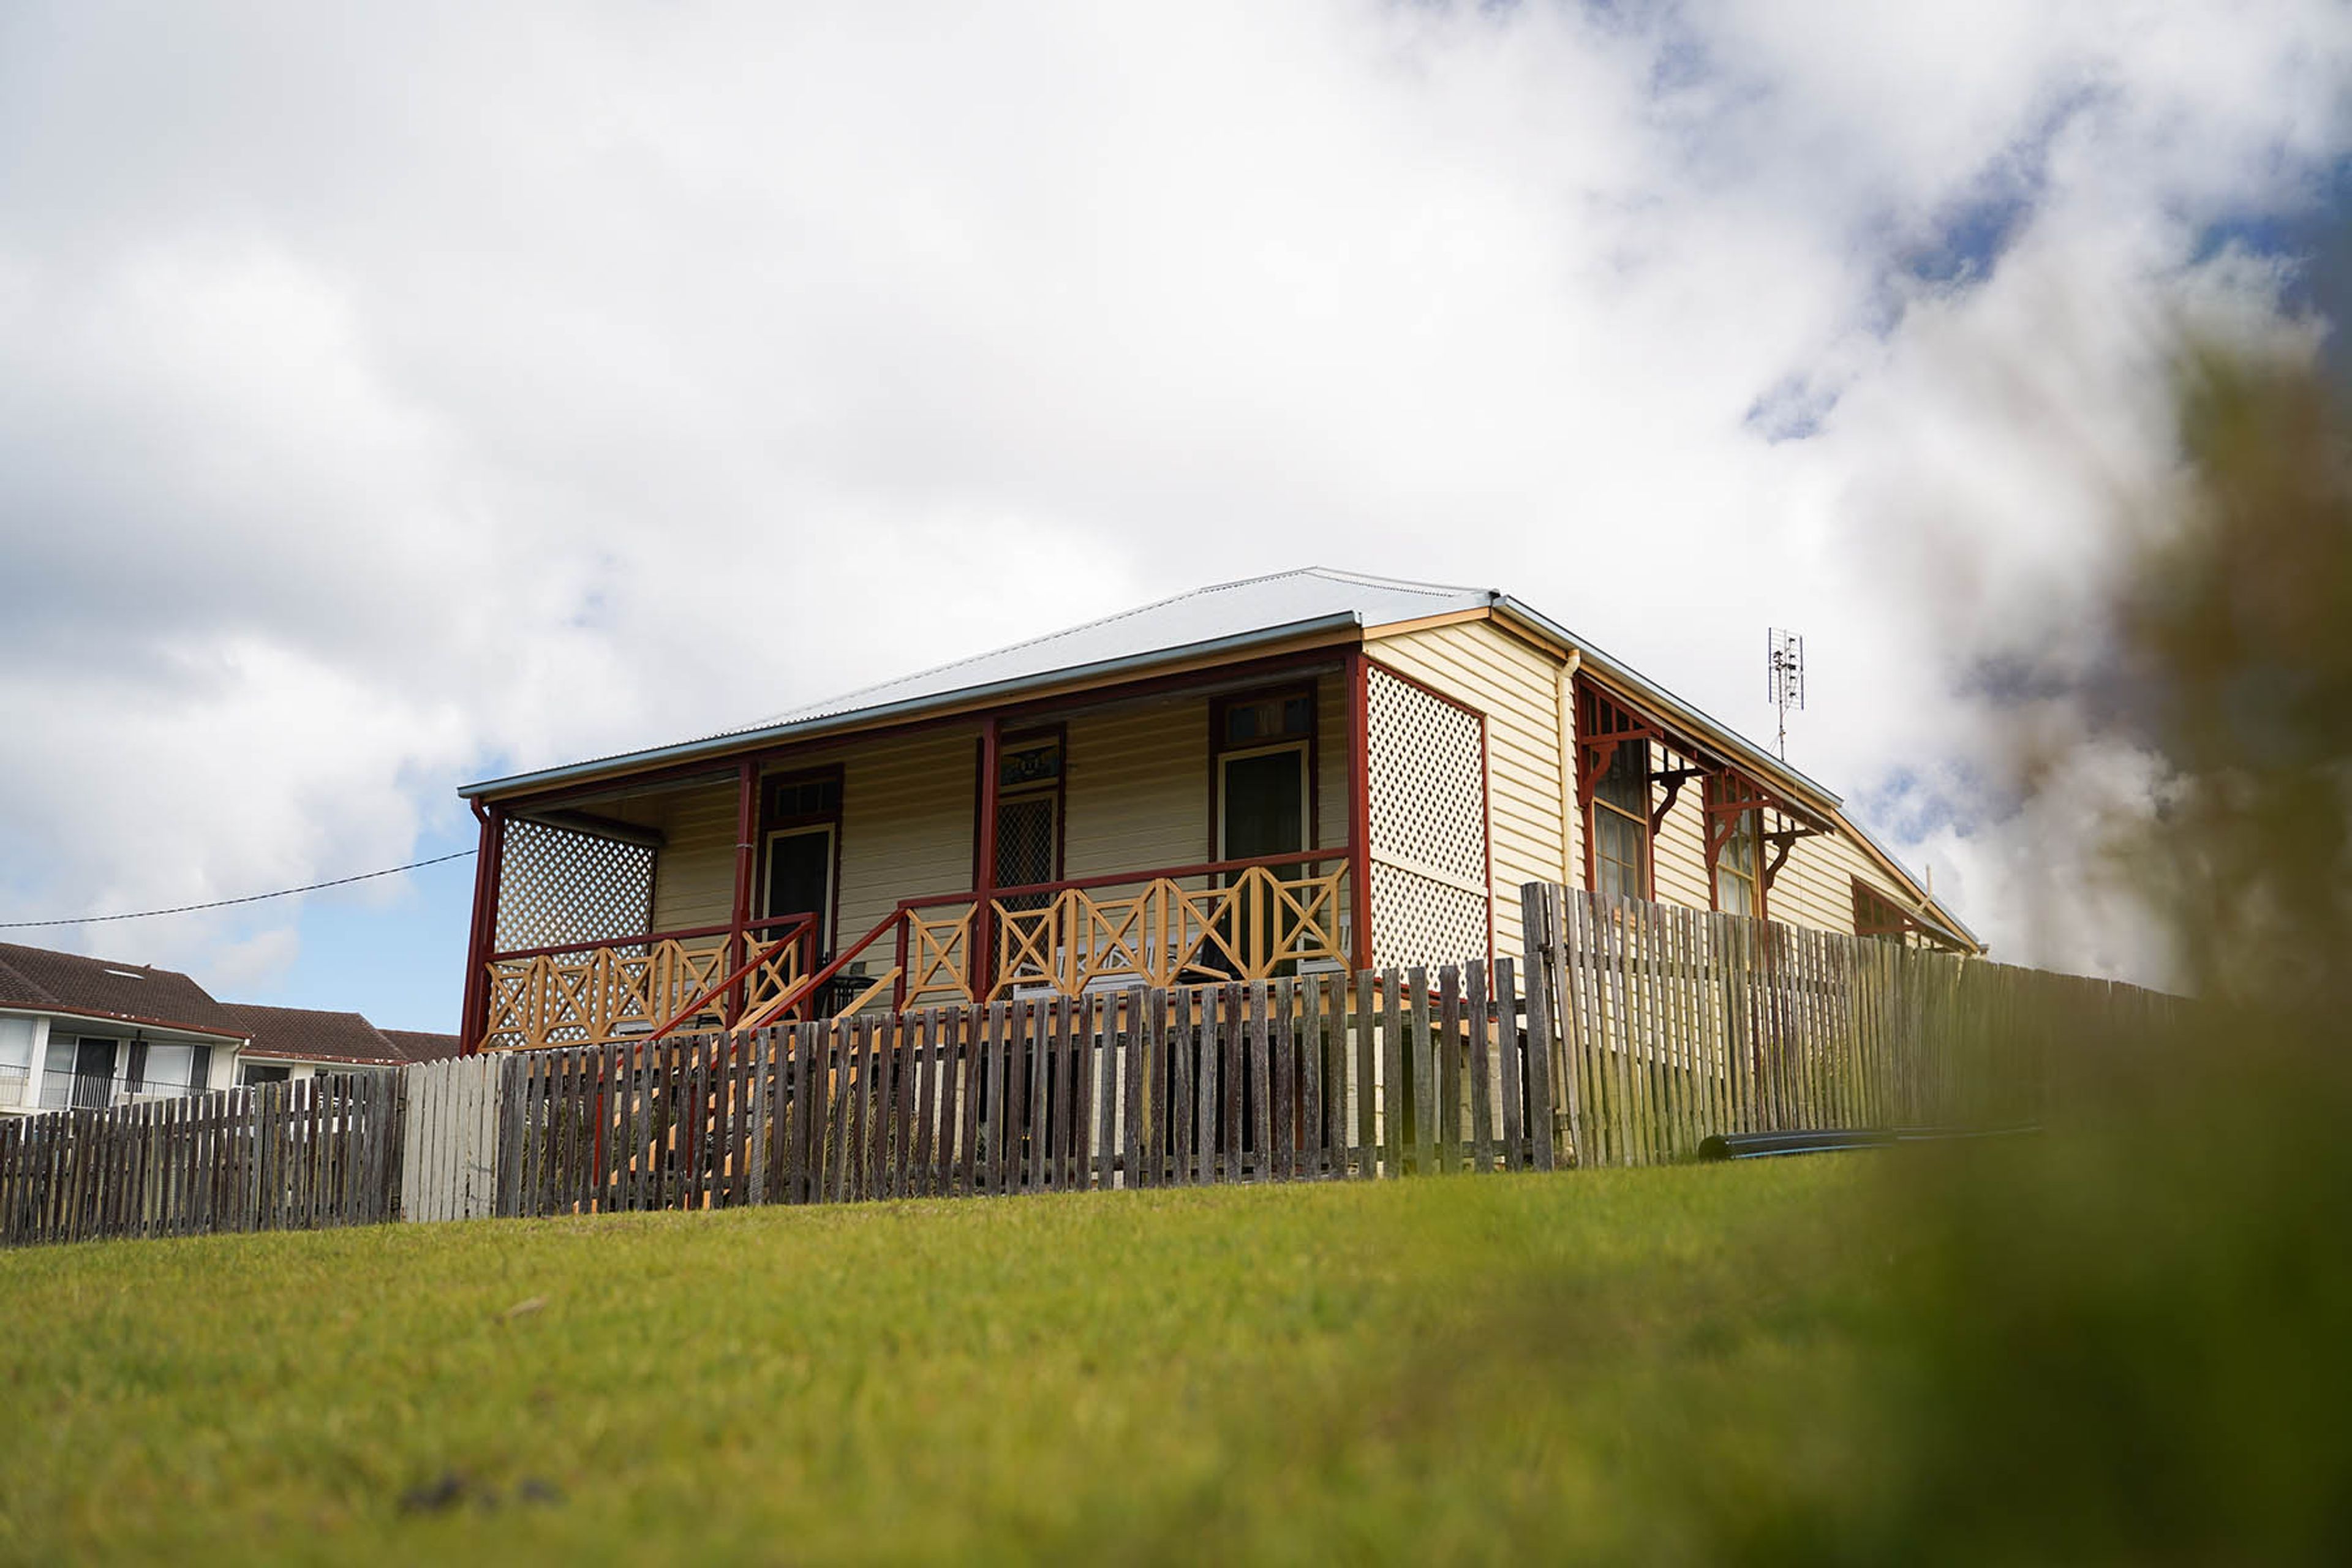 Yamba Lighthouse cottages up on the hill